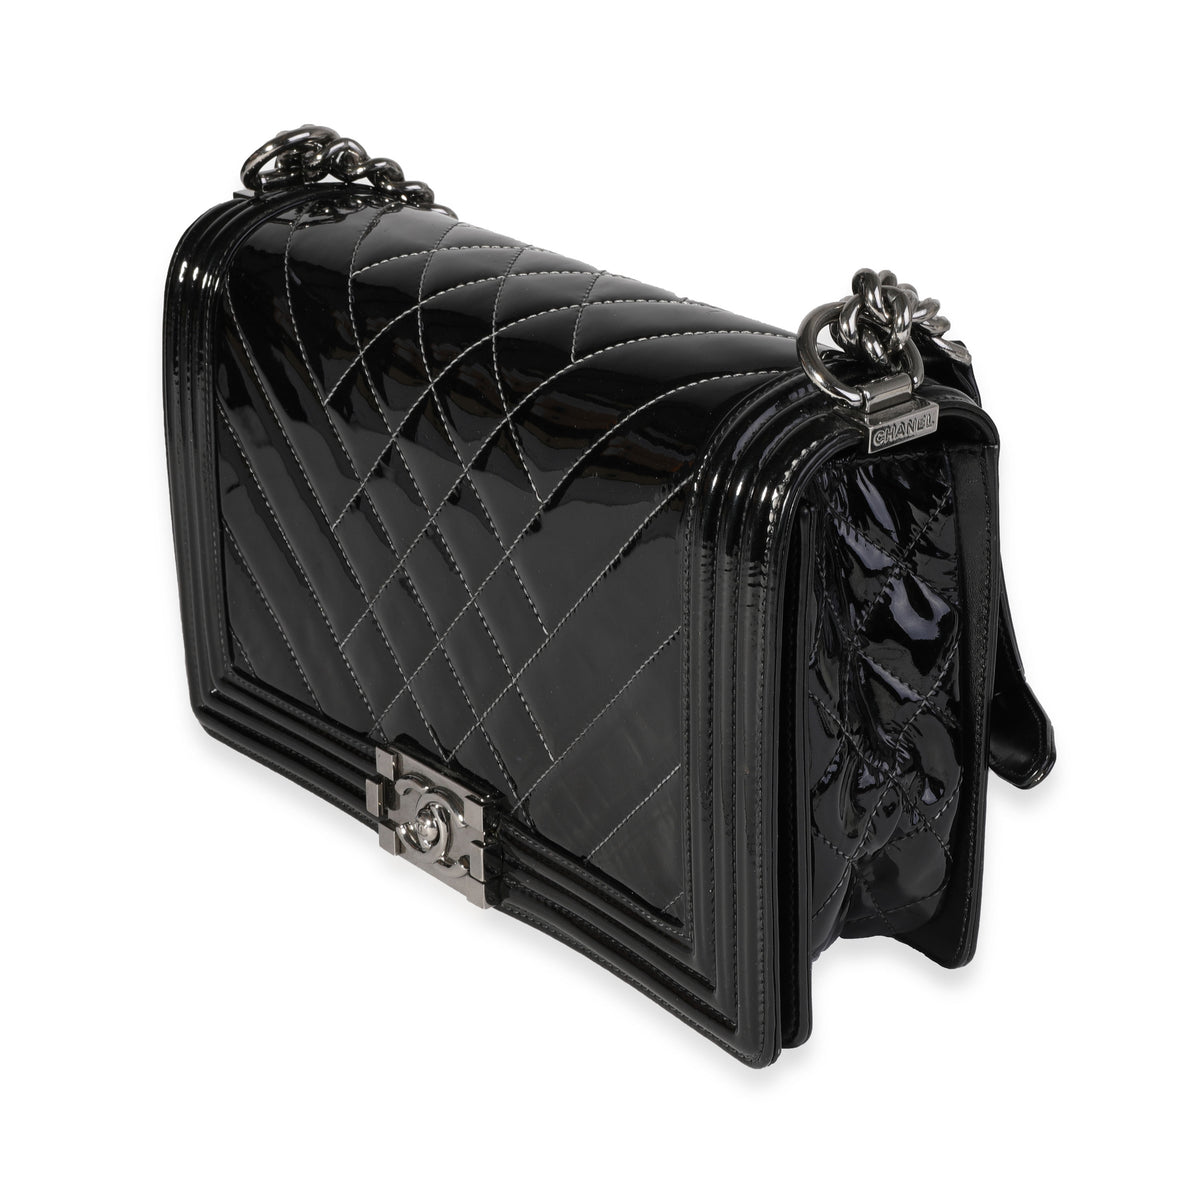 Chanel Blue Quilted Patent Leather Medium Boy Bag Silver Hardware,  2014-2015 Available For Immediate Sale At Sotheby's